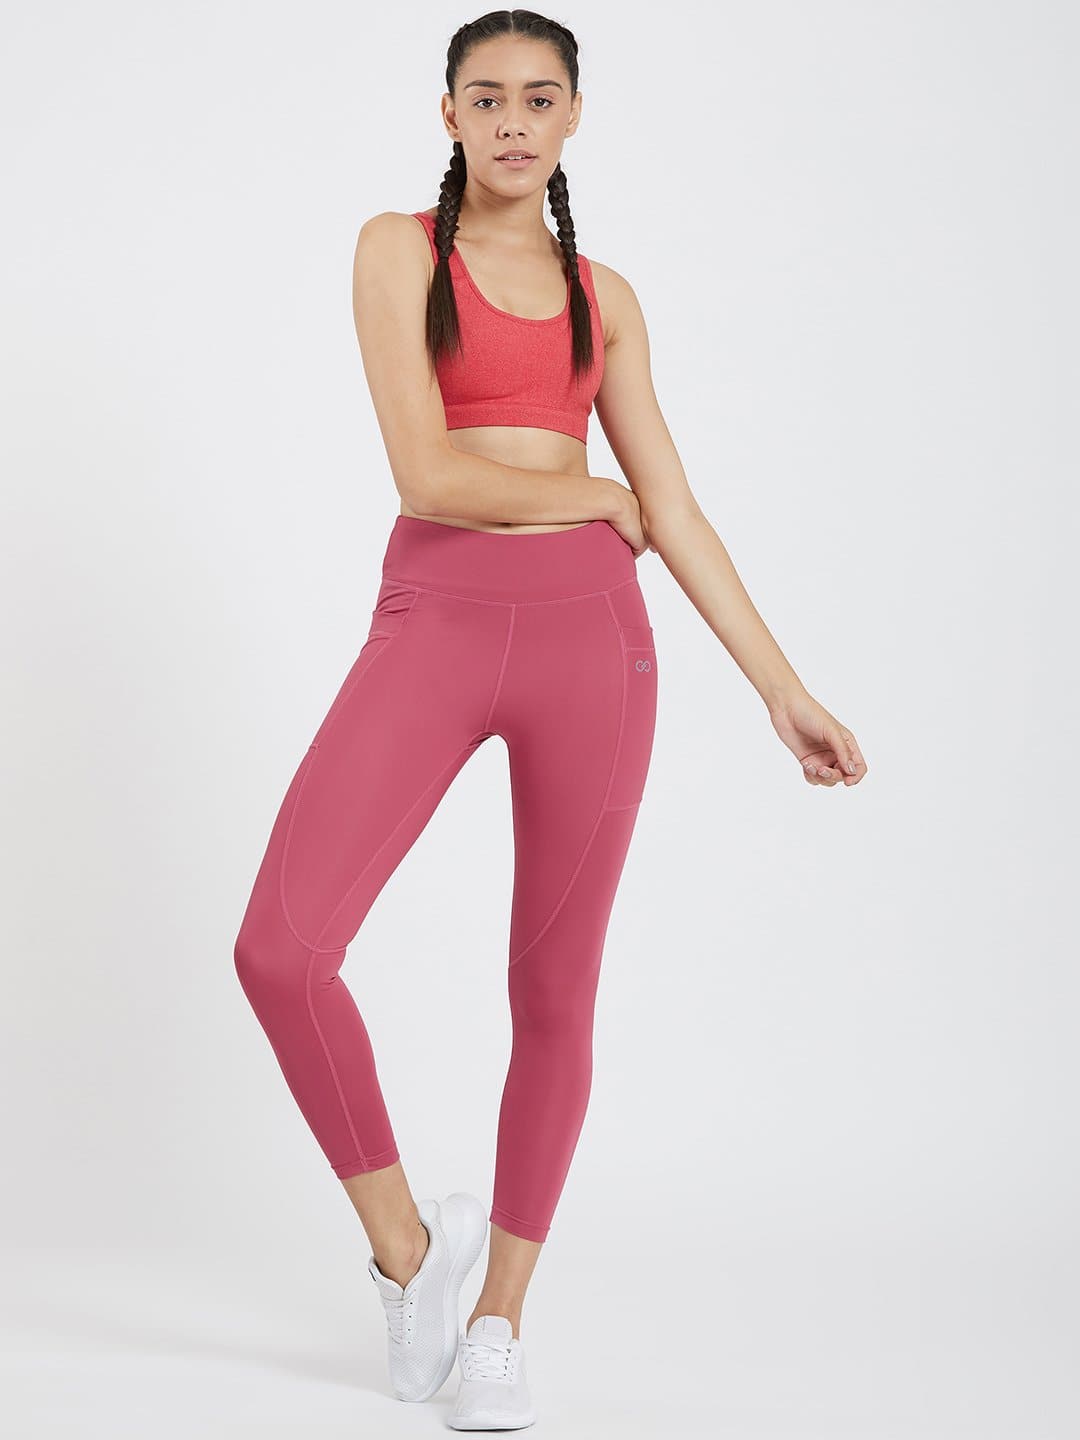 Maxtreme Power me Hippie Pink Ankle Pockets Leggings